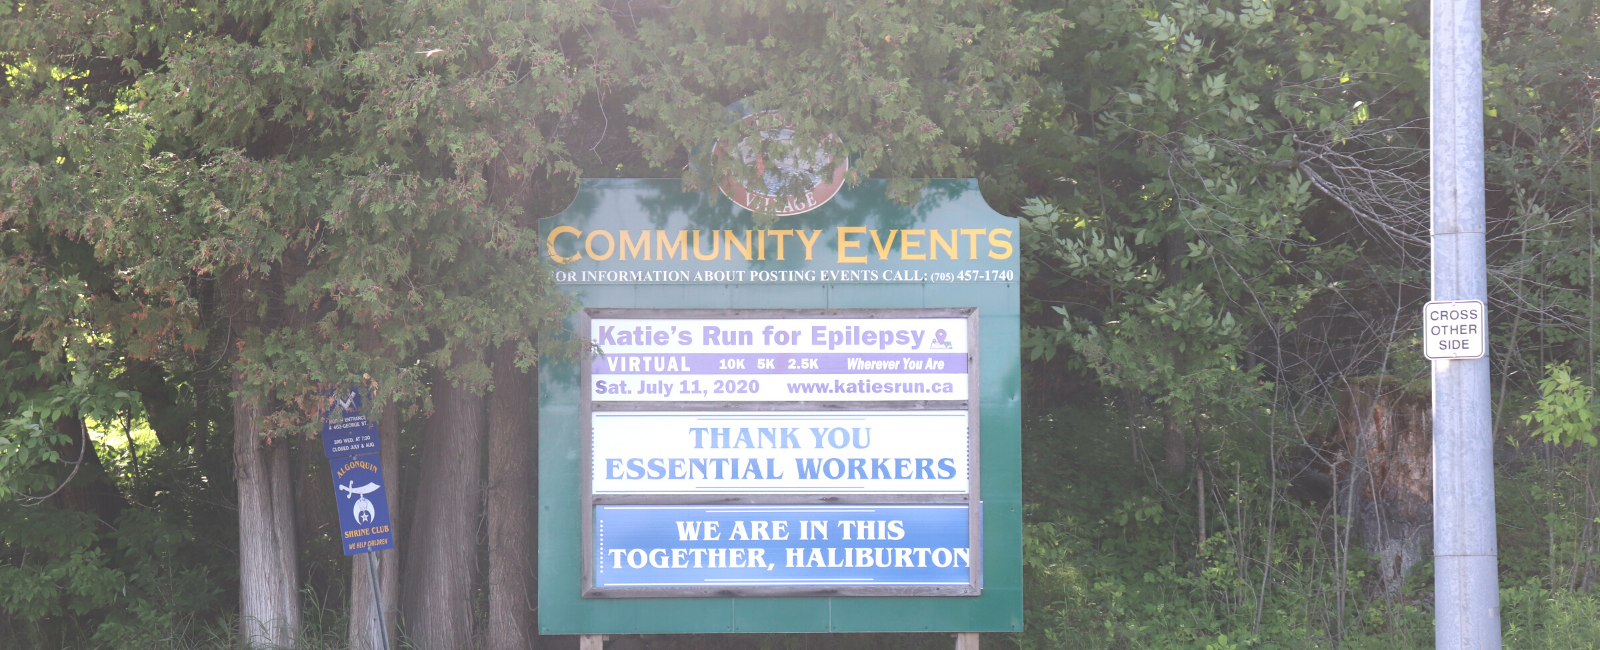 Community Events Board